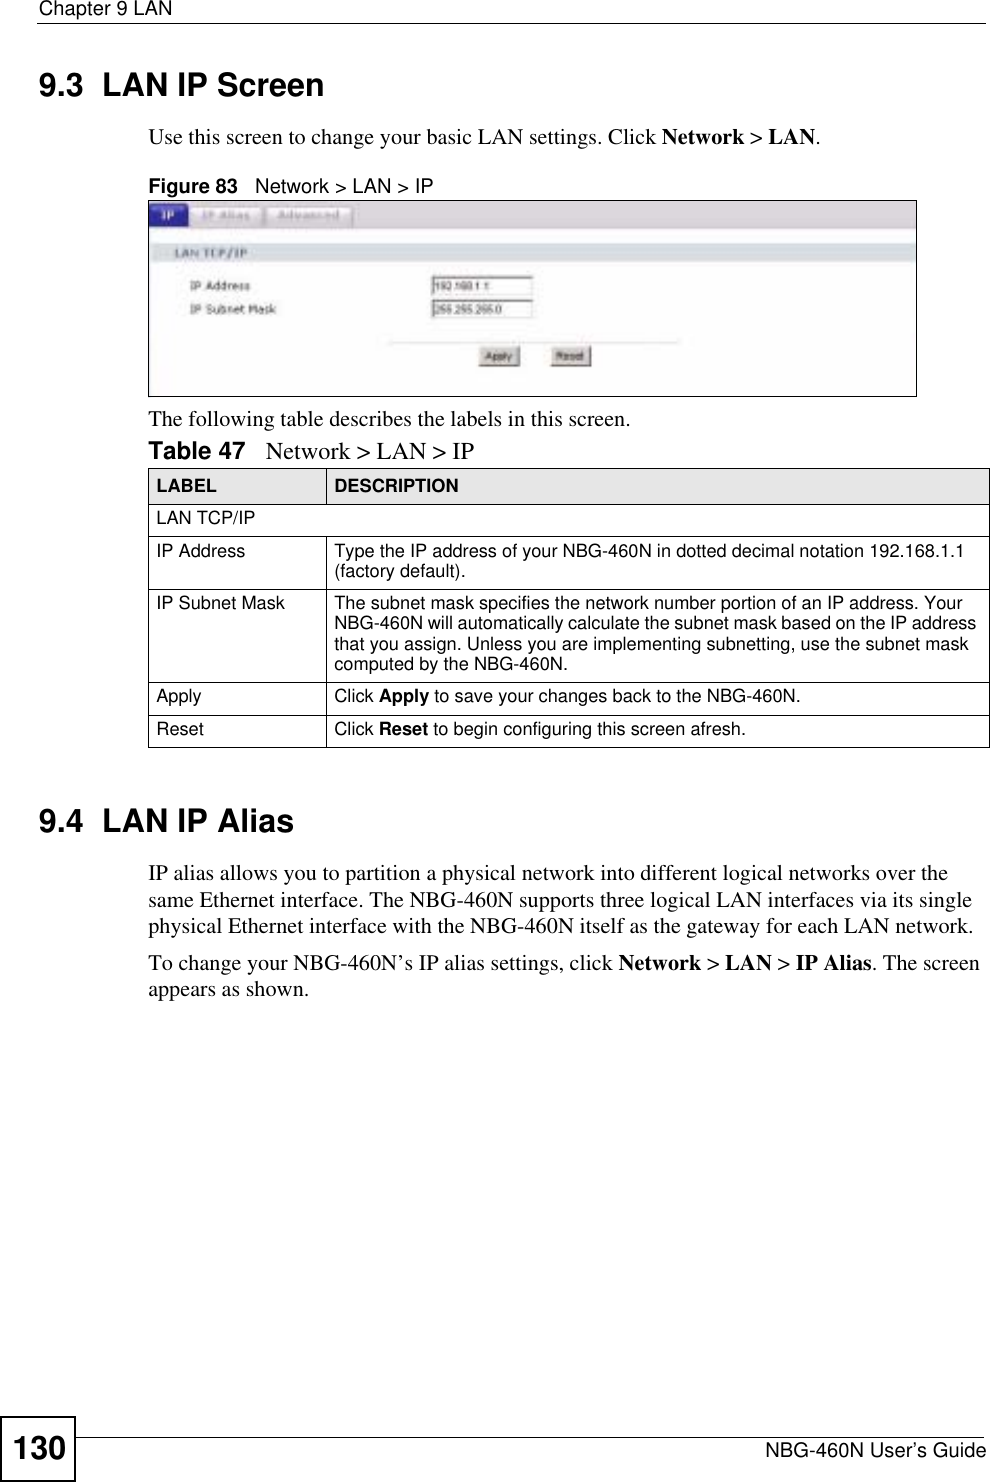 Chapter 9 LANNBG-460N User’s Guide1309.3  LAN IP ScreenUse this screen to change your basic LAN settings. Click Network &gt; LAN.Figure 83   Network &gt; LAN &gt; IP The following table describes the labels in this screen.9.4  LAN IP Alias IP alias allows you to partition a physical network into different logical networks over the same Ethernet interface. The NBG-460N supports three logical LAN interfaces via its single physical Ethernet interface with the NBG-460N itself as the gateway for each LAN network.To change your NBG-460N’s IP alias settings, click Network &gt; LAN &gt; IP Alias. The screen appears as shown.Table 47 Network &gt; LAN &gt; IPLABEL DESCRIPTIONLAN TCP/IPIP Address Type the IP address of your NBG-460N in dotted decimal notation 192.168.1.1 (factory default).IP Subnet Mask The subnet mask specifies the network number portion of an IP address. Your NBG-460N will automatically calculate the subnet mask based on the IP address that you assign. Unless you are implementing subnetting, use the subnet mask computed by the NBG-460N.Apply Click Apply to save your changes back to the NBG-460N.Reset Click Reset to begin configuring this screen afresh.